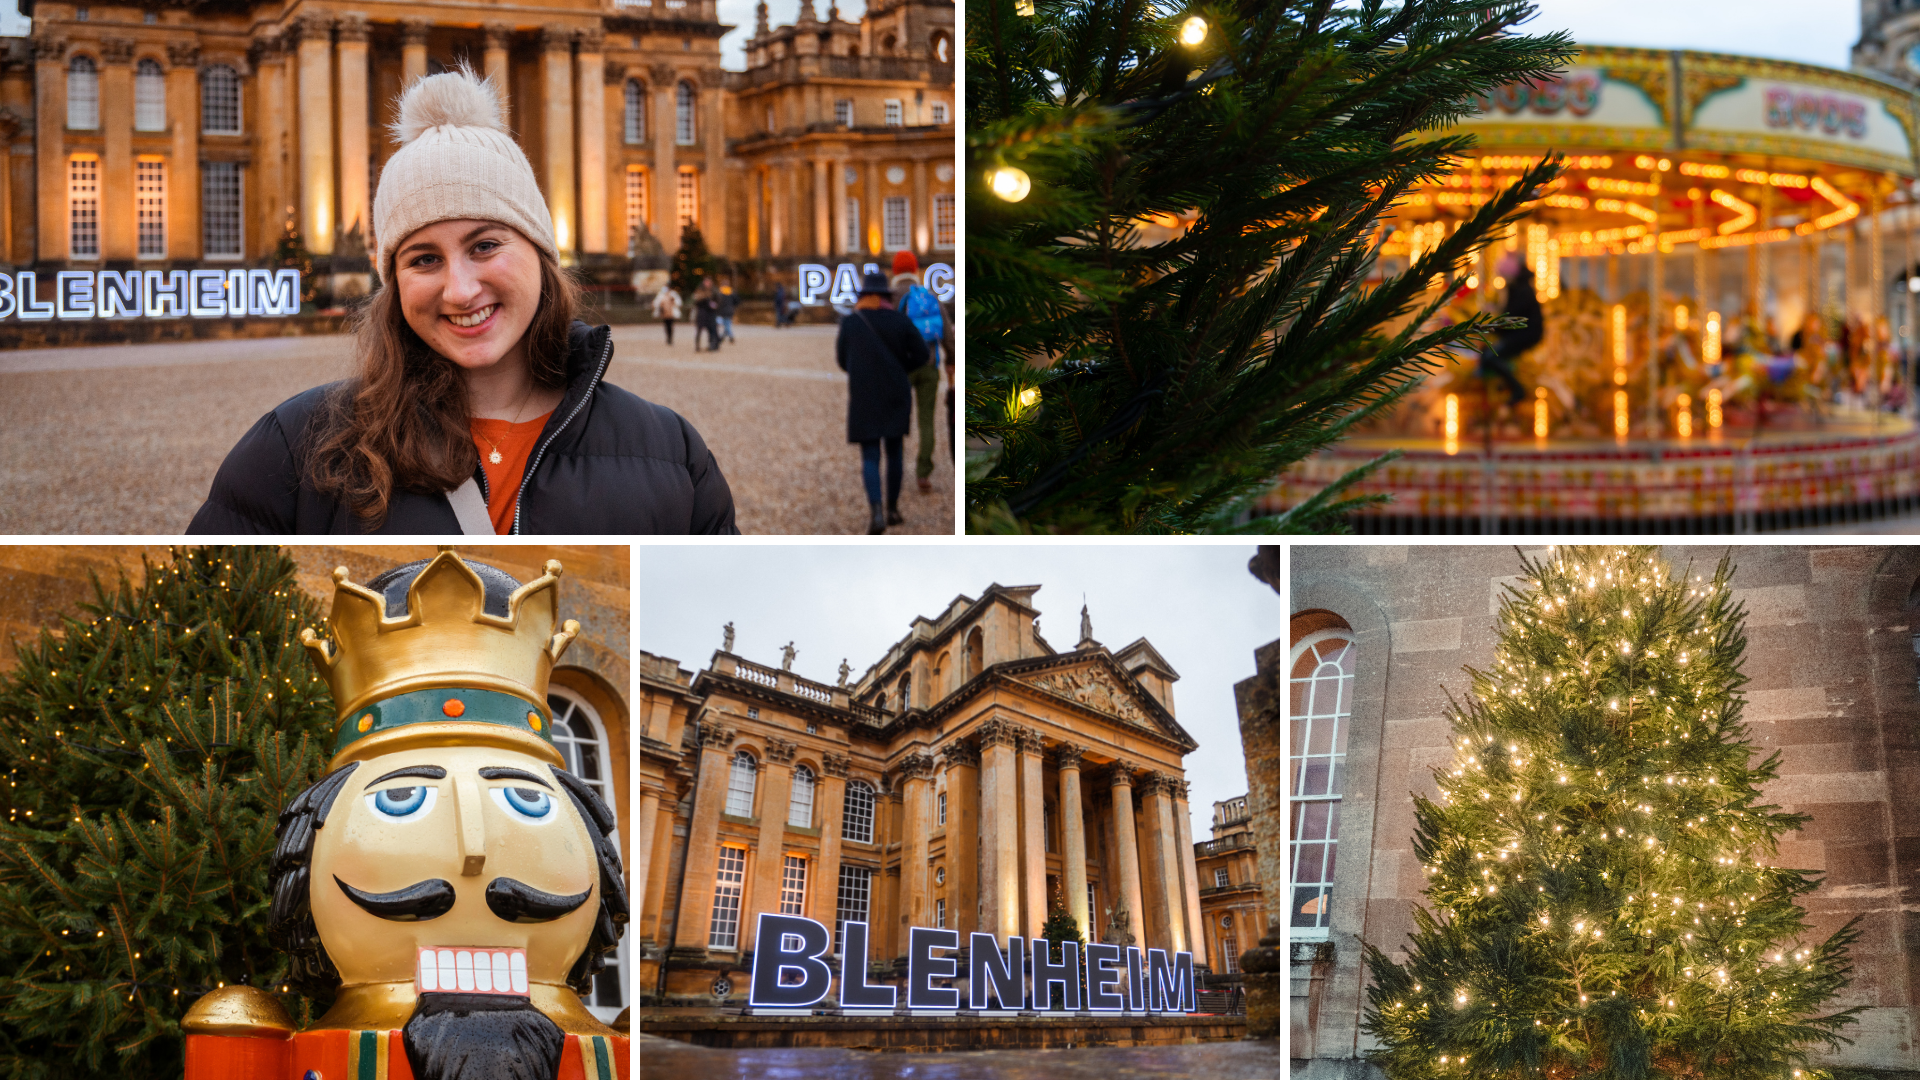 Top to bottom, left to right: Image of girl in bobble hat stood in front of Blenhiem Palace smiling at camera. Photo of Christmas tree with carousel in background. Giant Nutcracker in front of Christmas Tree. Photo of front of Blenhiem Palace with 'Blenhiem' illuminated in front. Real christmas tree lit up.